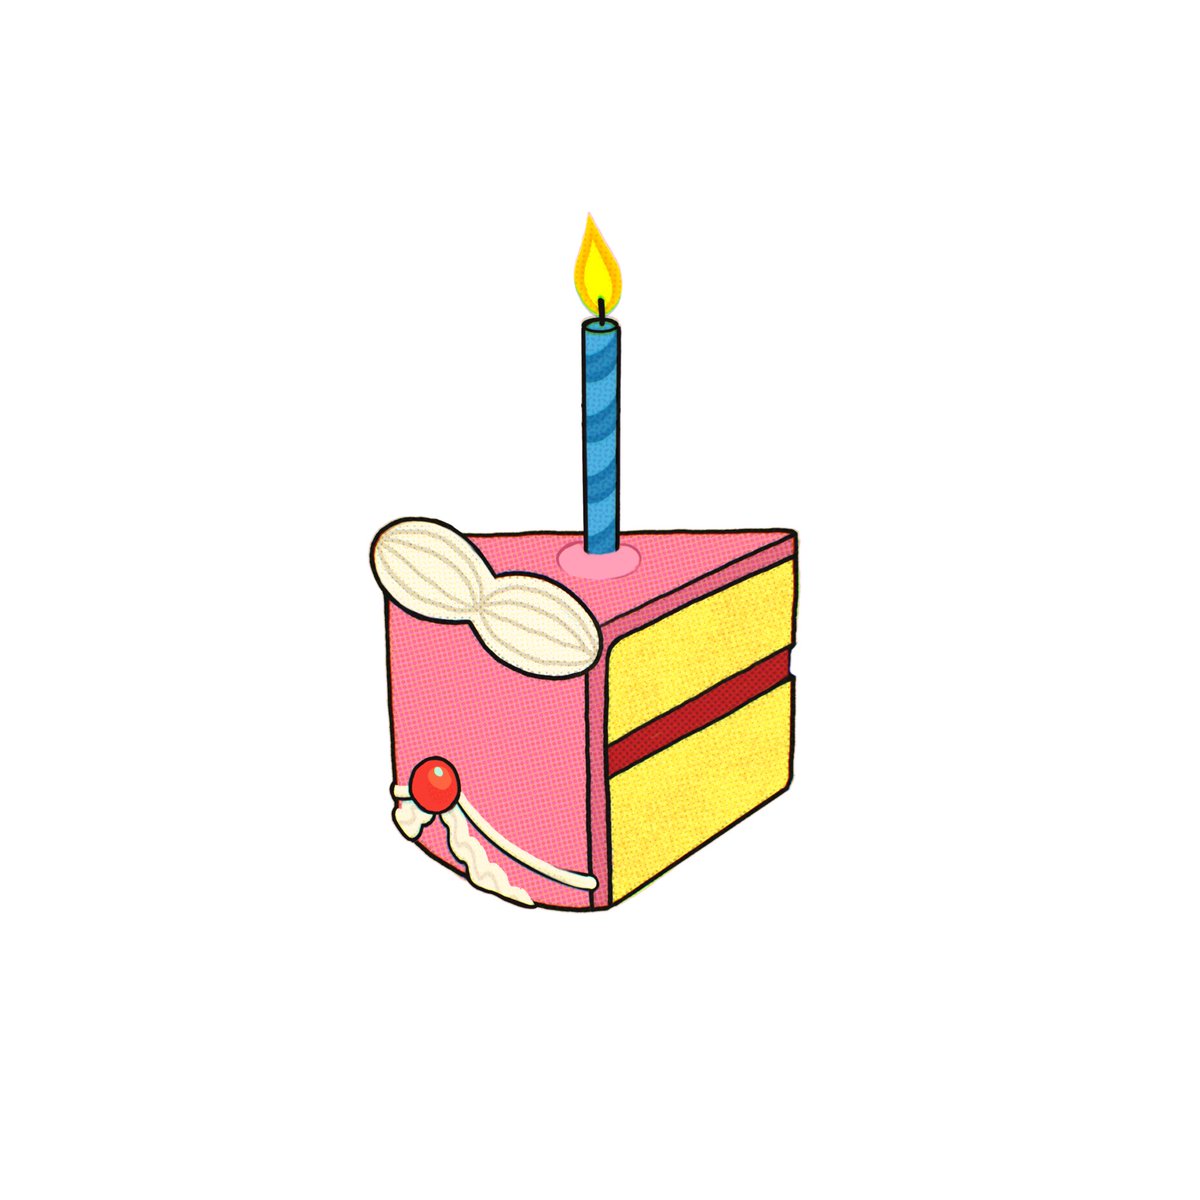 no humans food food focus candle cake simple background still life  illustration images